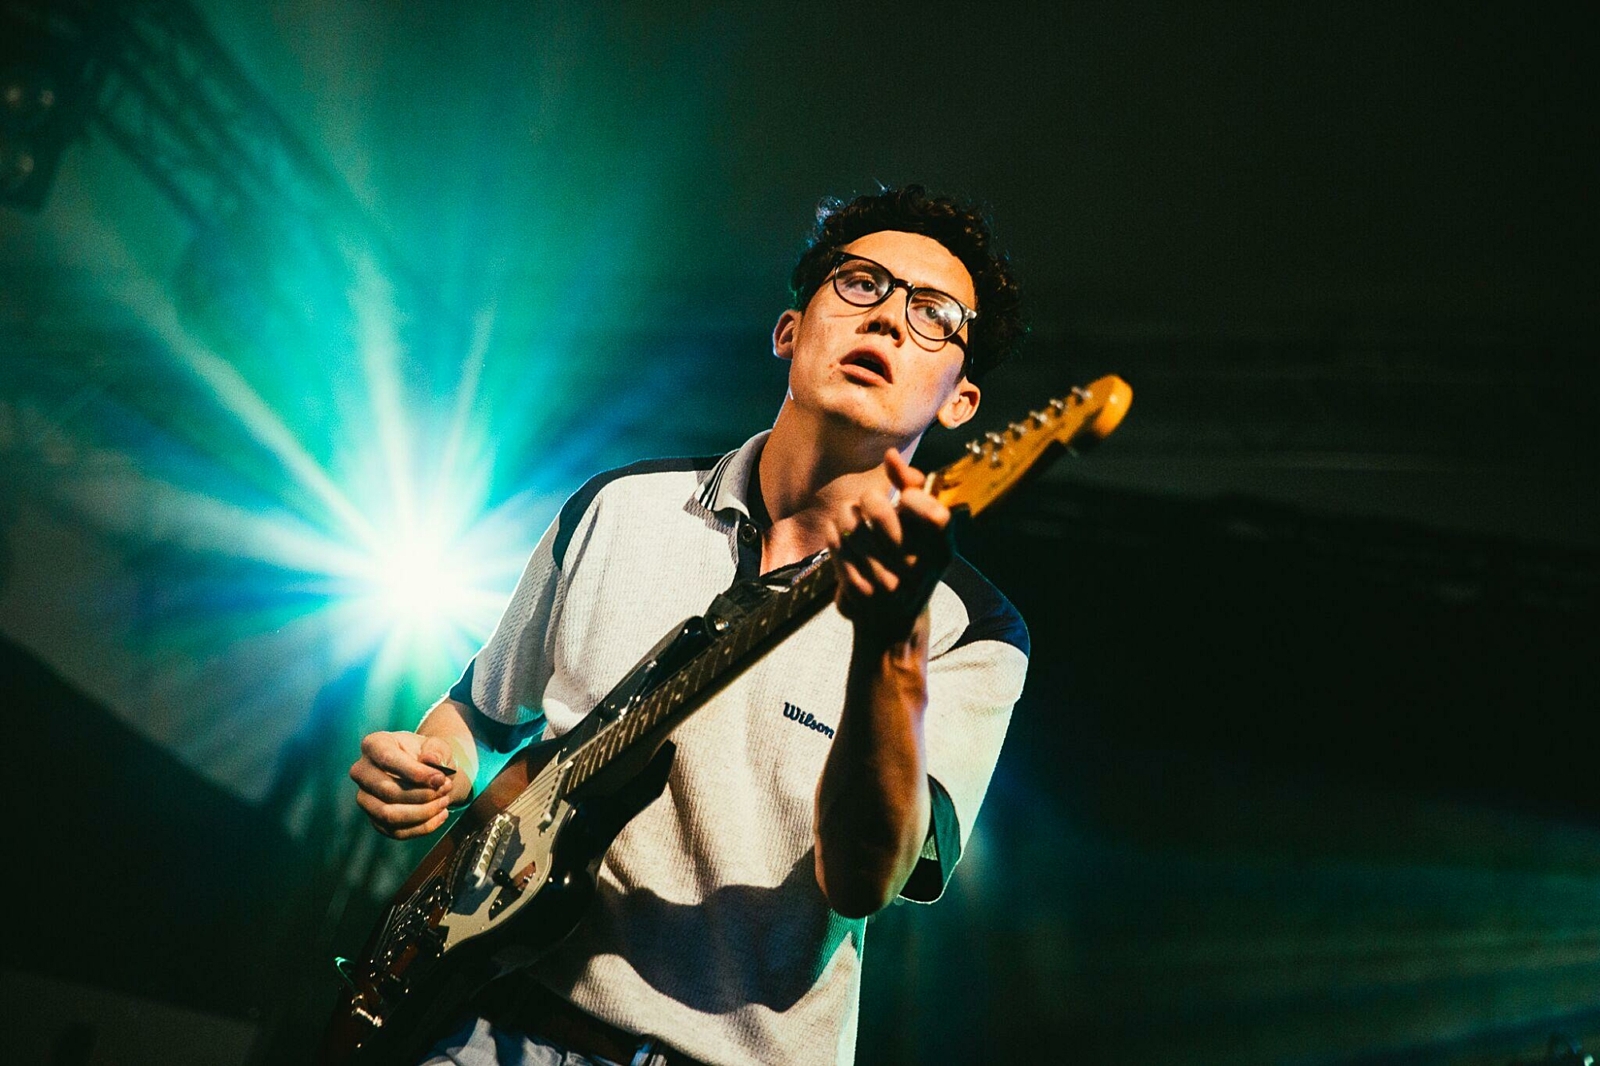 The Magic Gang, Pulled Apart By Horses and more are set for Live At Leeds 2018